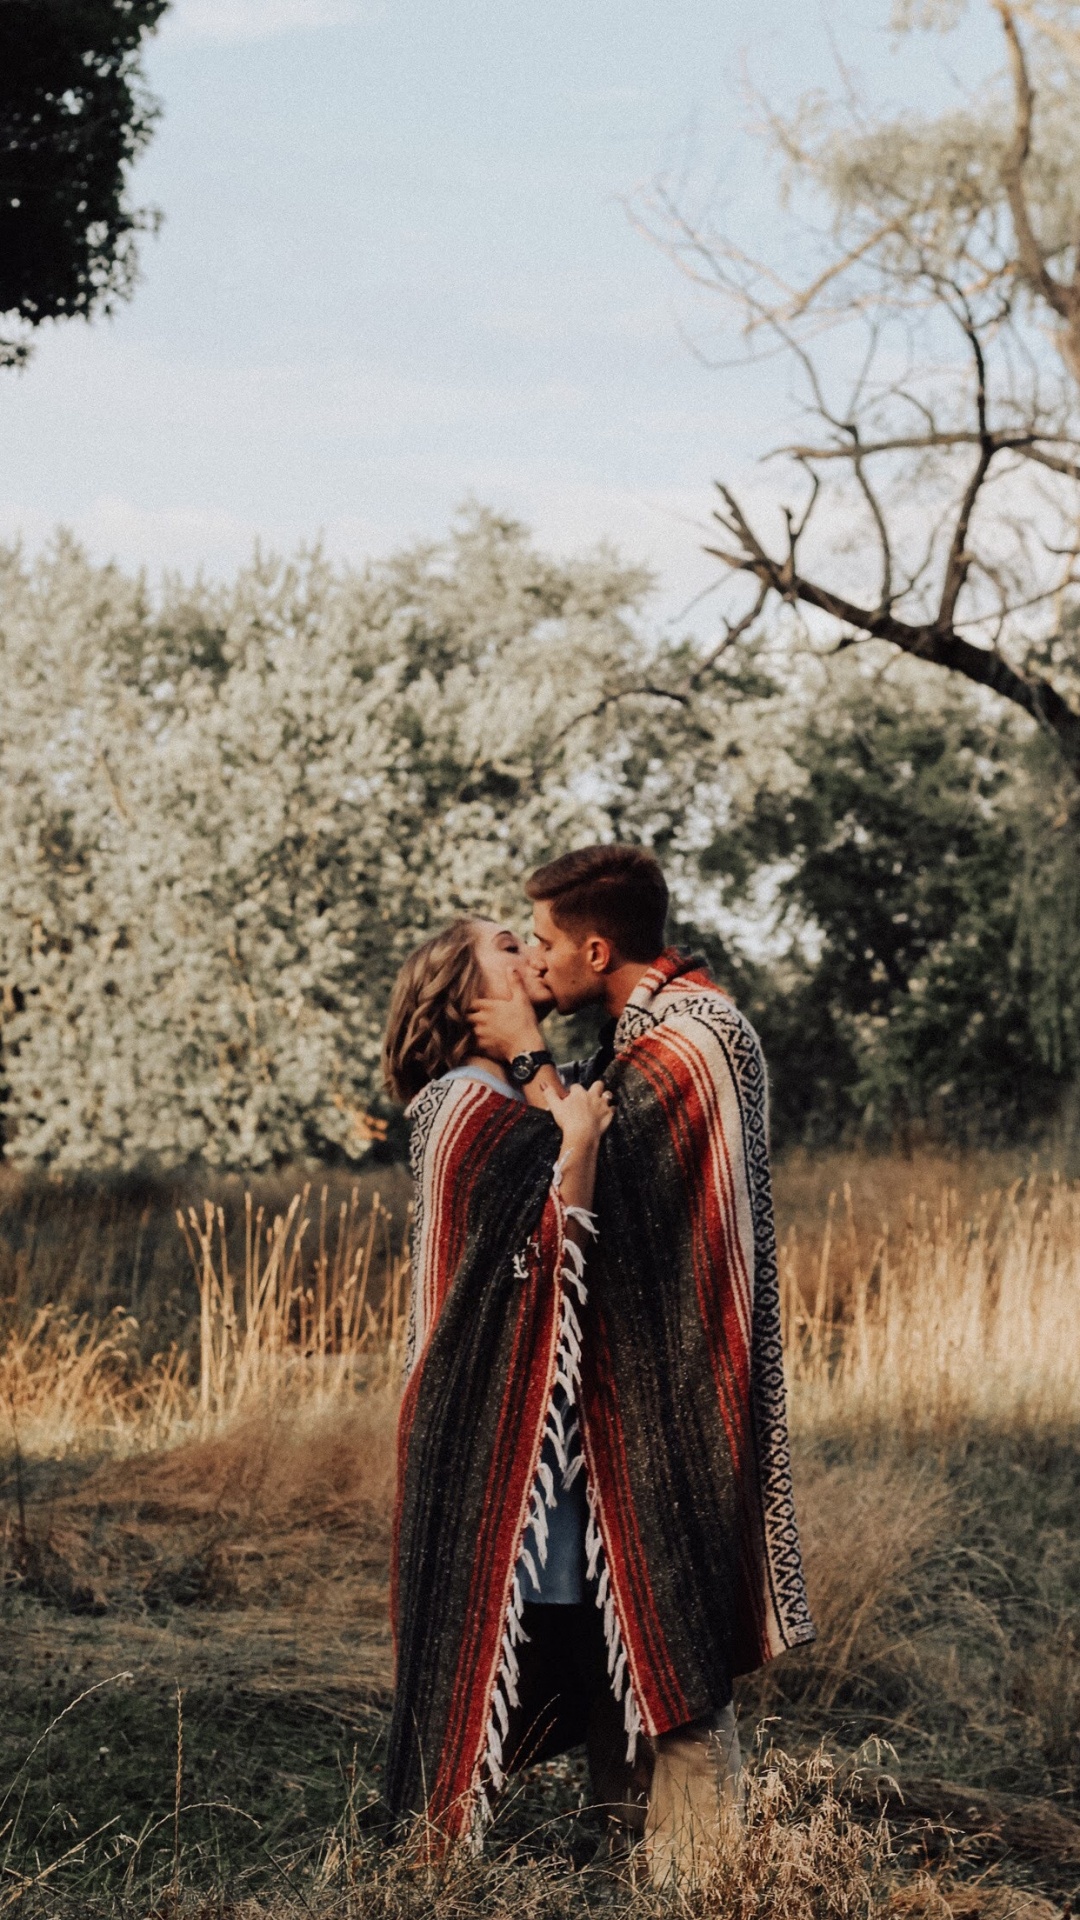 Romance, People in Nature, Tree, Outerwear, Dress. Wallpaper in 1080x1920 Resolution